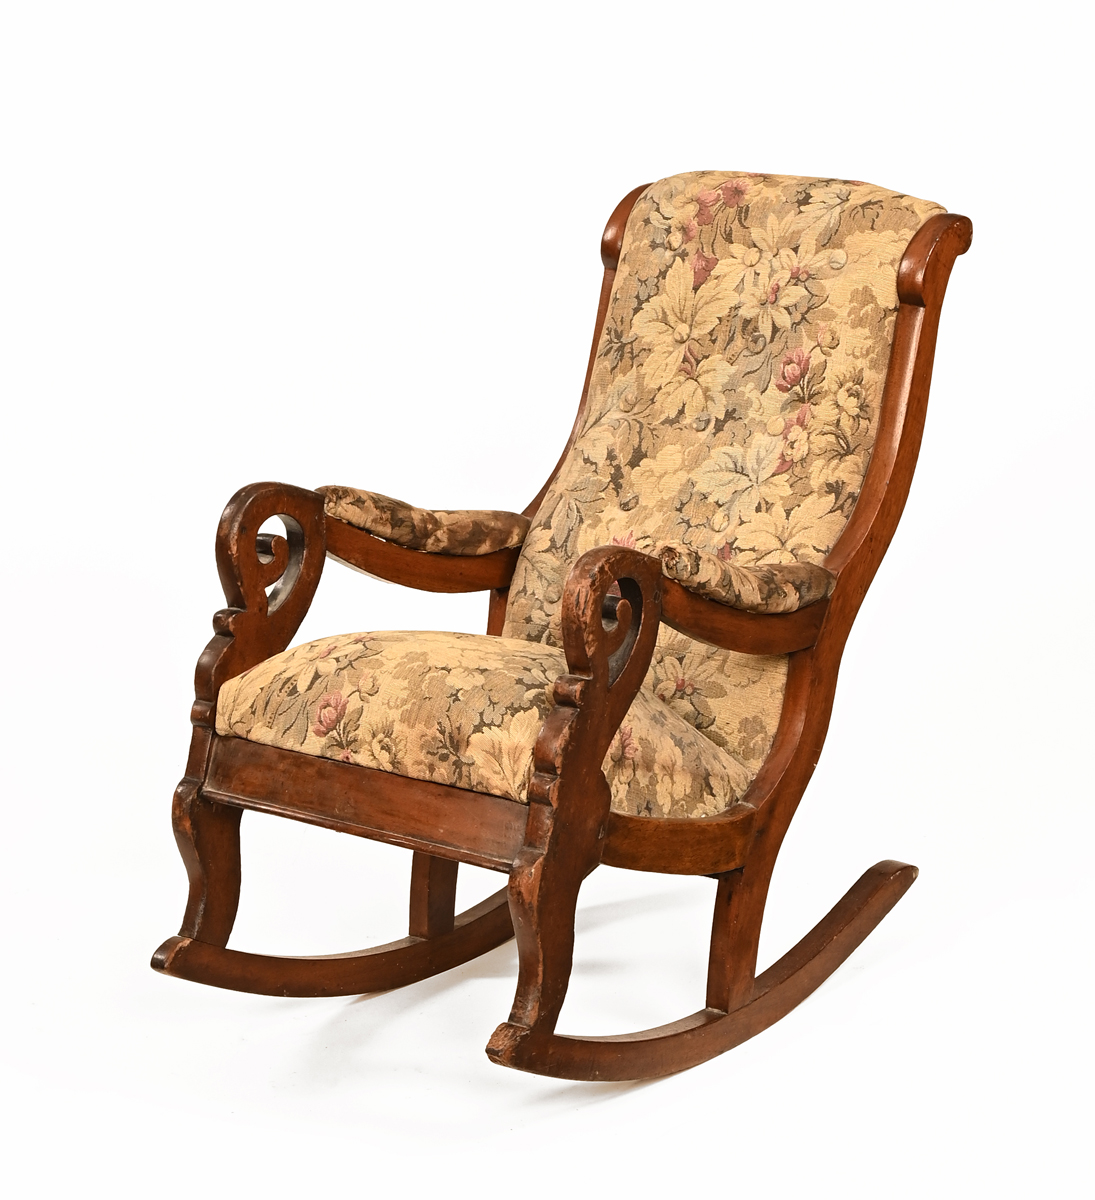 A Victorian child's rocking chair, with deep buttoned back and stuffover seat.